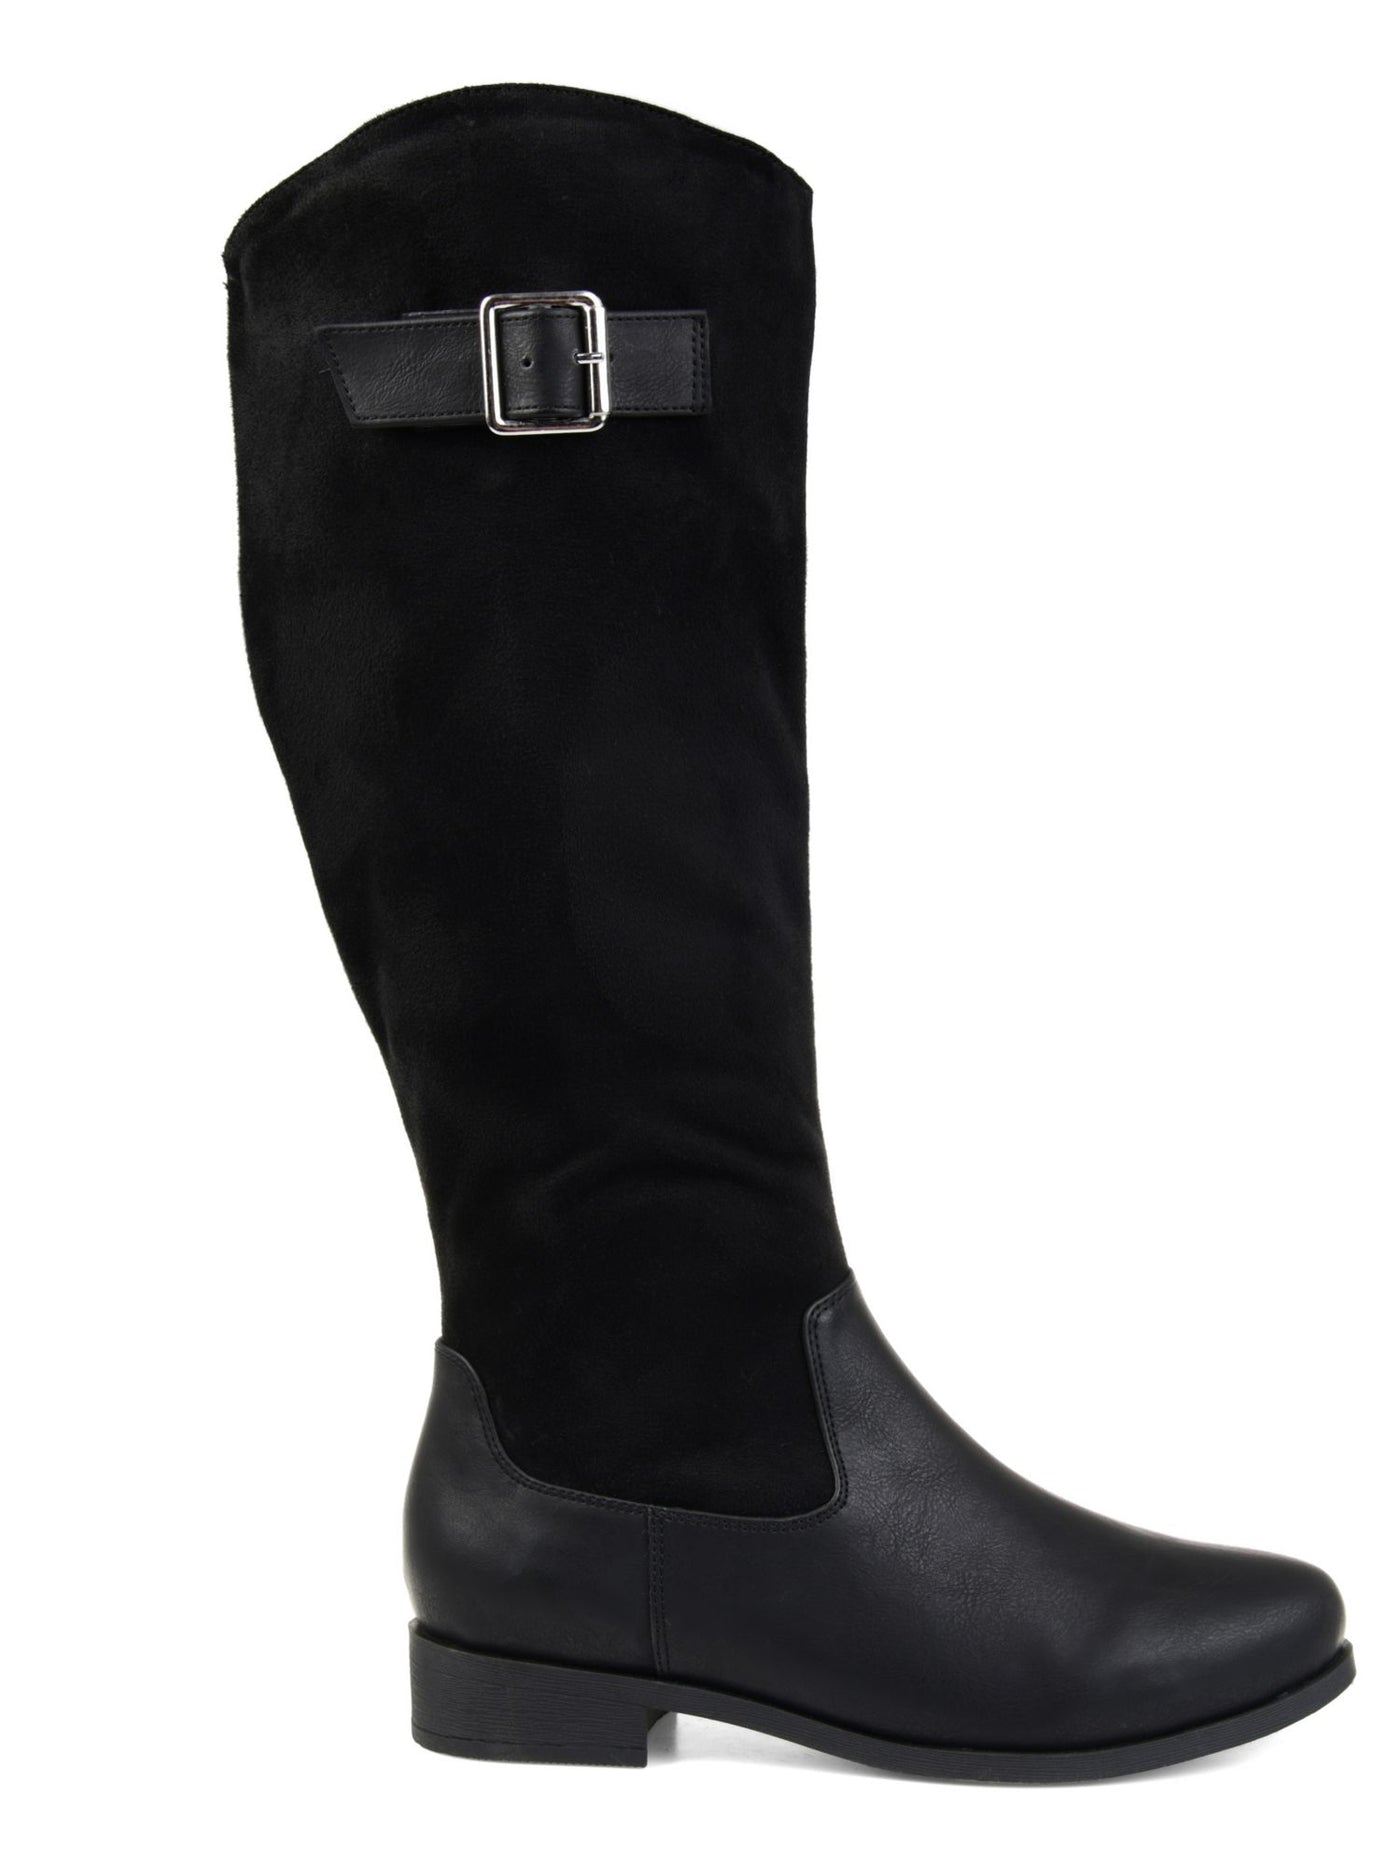 JOURNEE COLLECTION Womens Black Buckle Accent Cushioned Wide Calf Frenchy Almond Toe Stacked Heel Zip-Up Western Boot 7.5